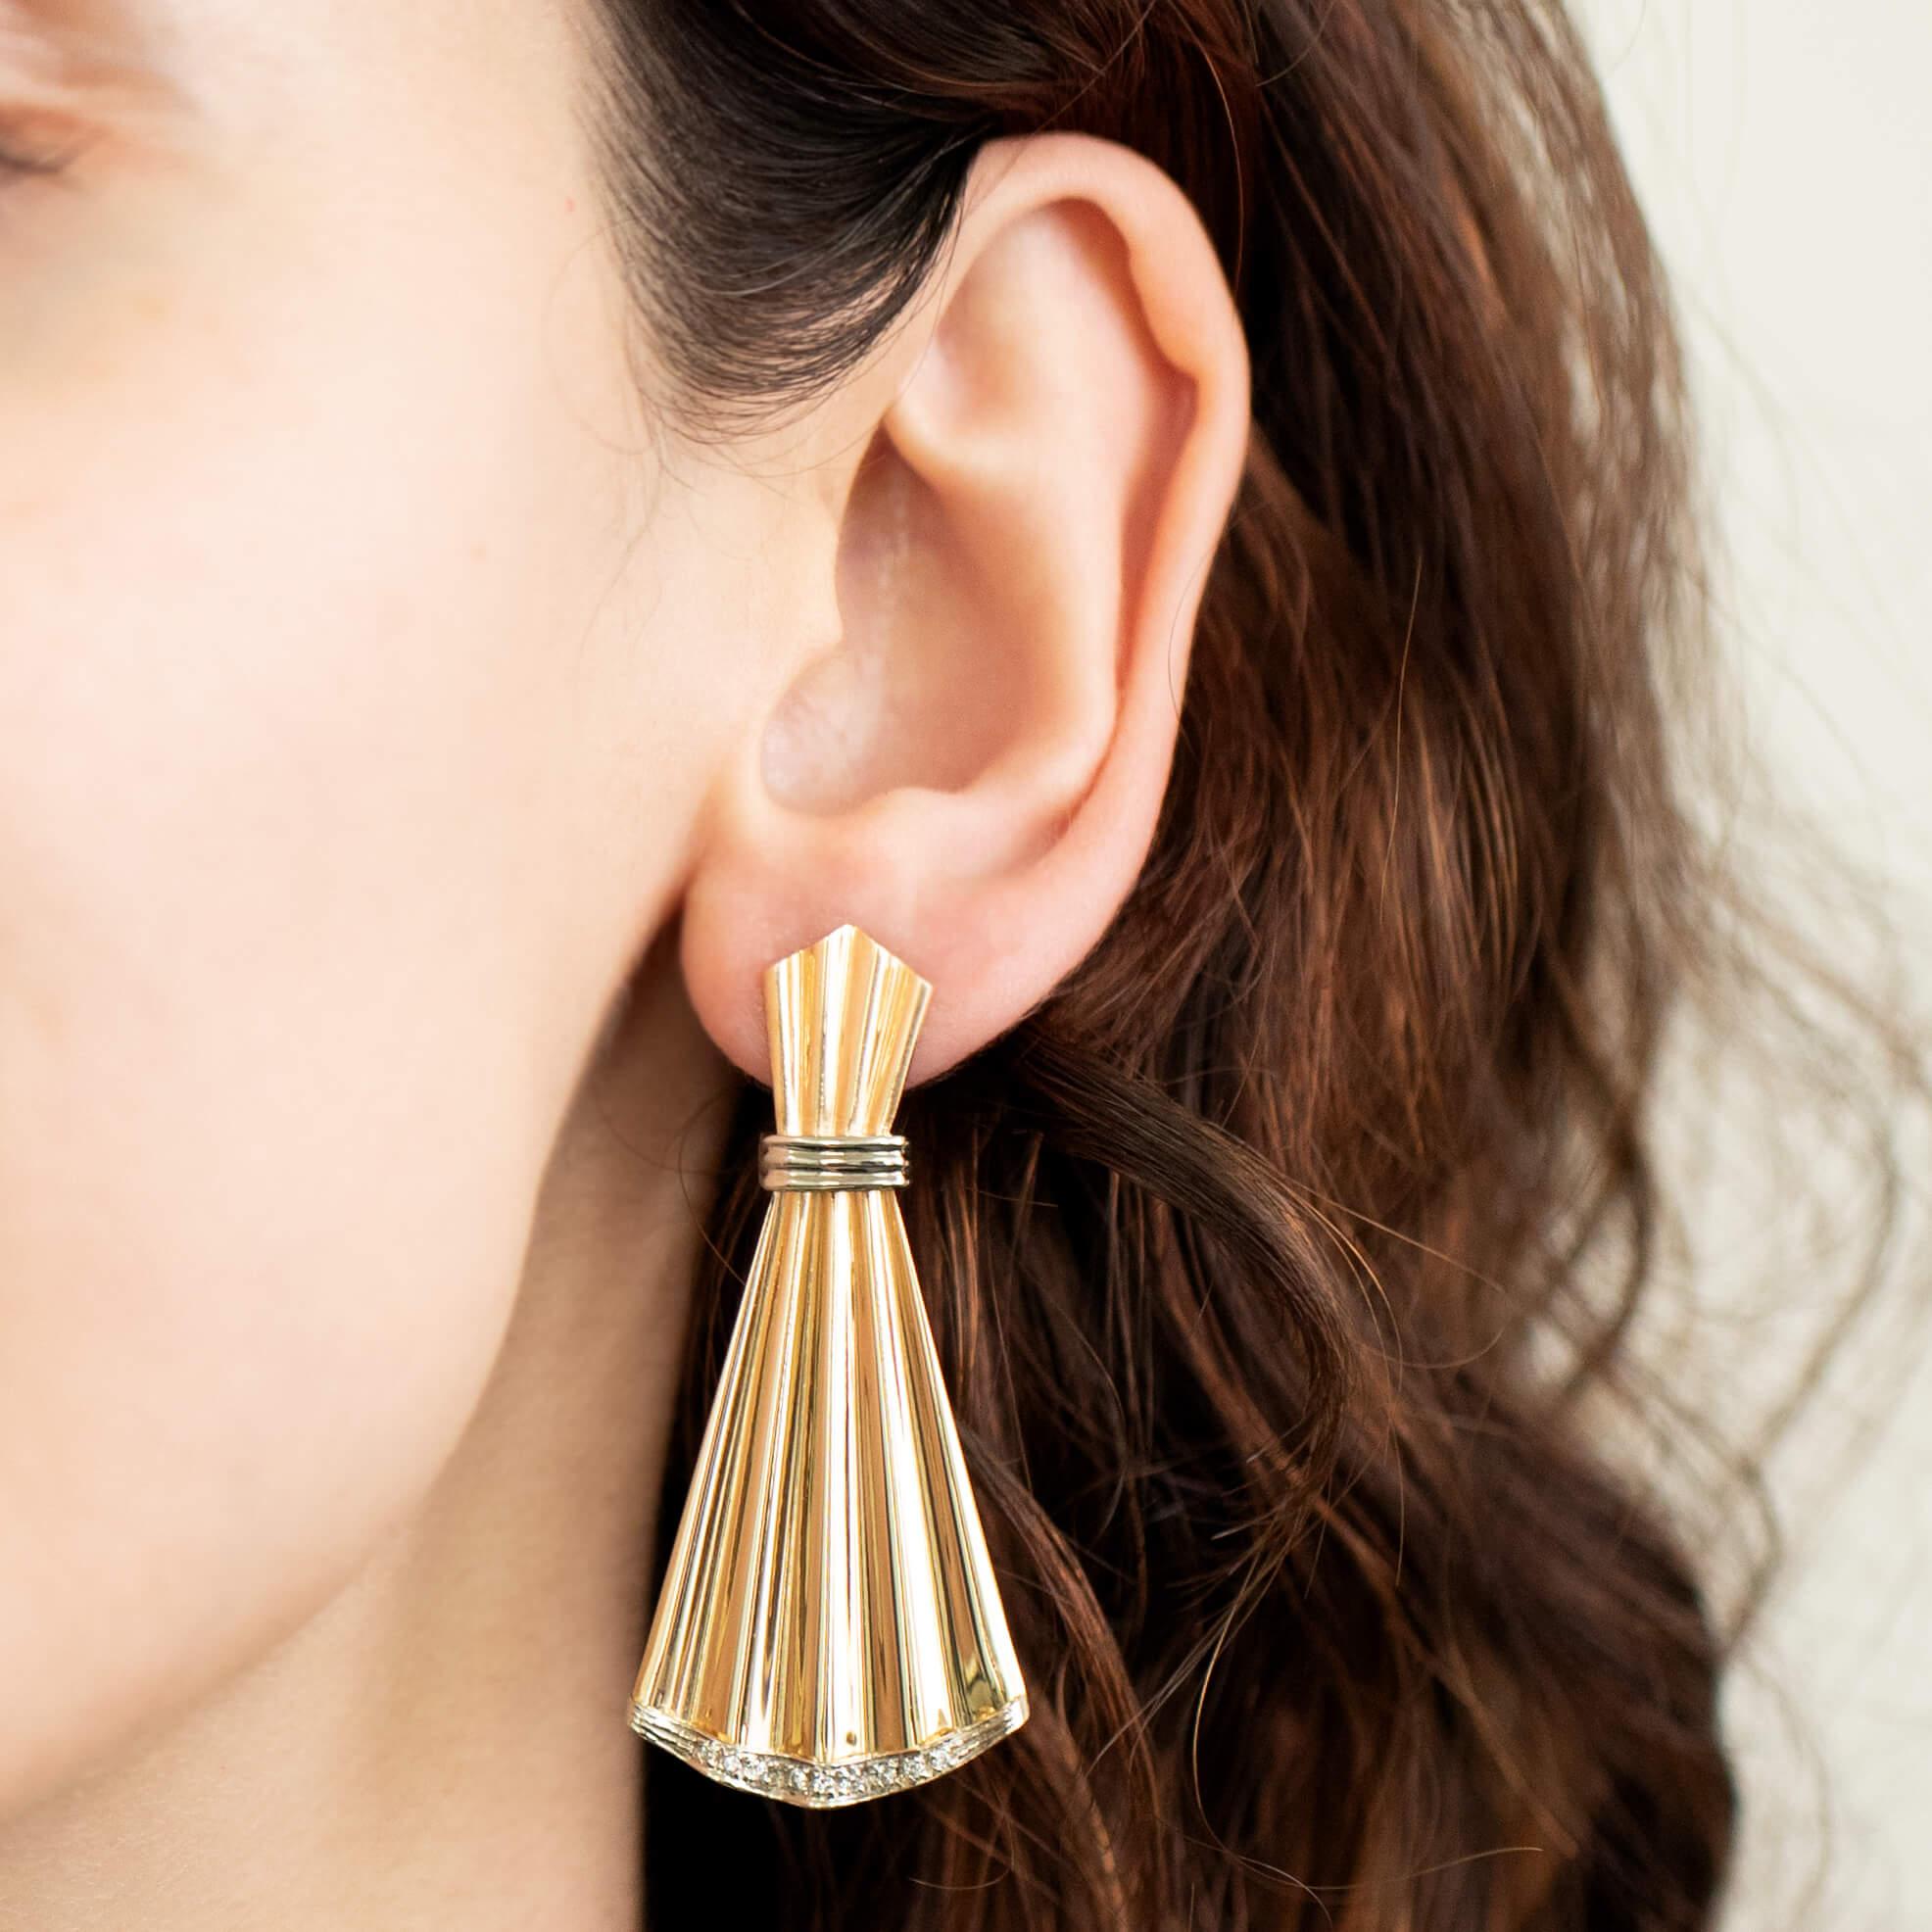 One pair of long hinged 14k two-tone gold drop earrings. Portraying the ‘Retro’ style fluted fans featuring a band of small brilliant cut diamonds on the ends. Fitted with a post and butterfly for secure wear.

Diamond: Sixteen small round brilliant